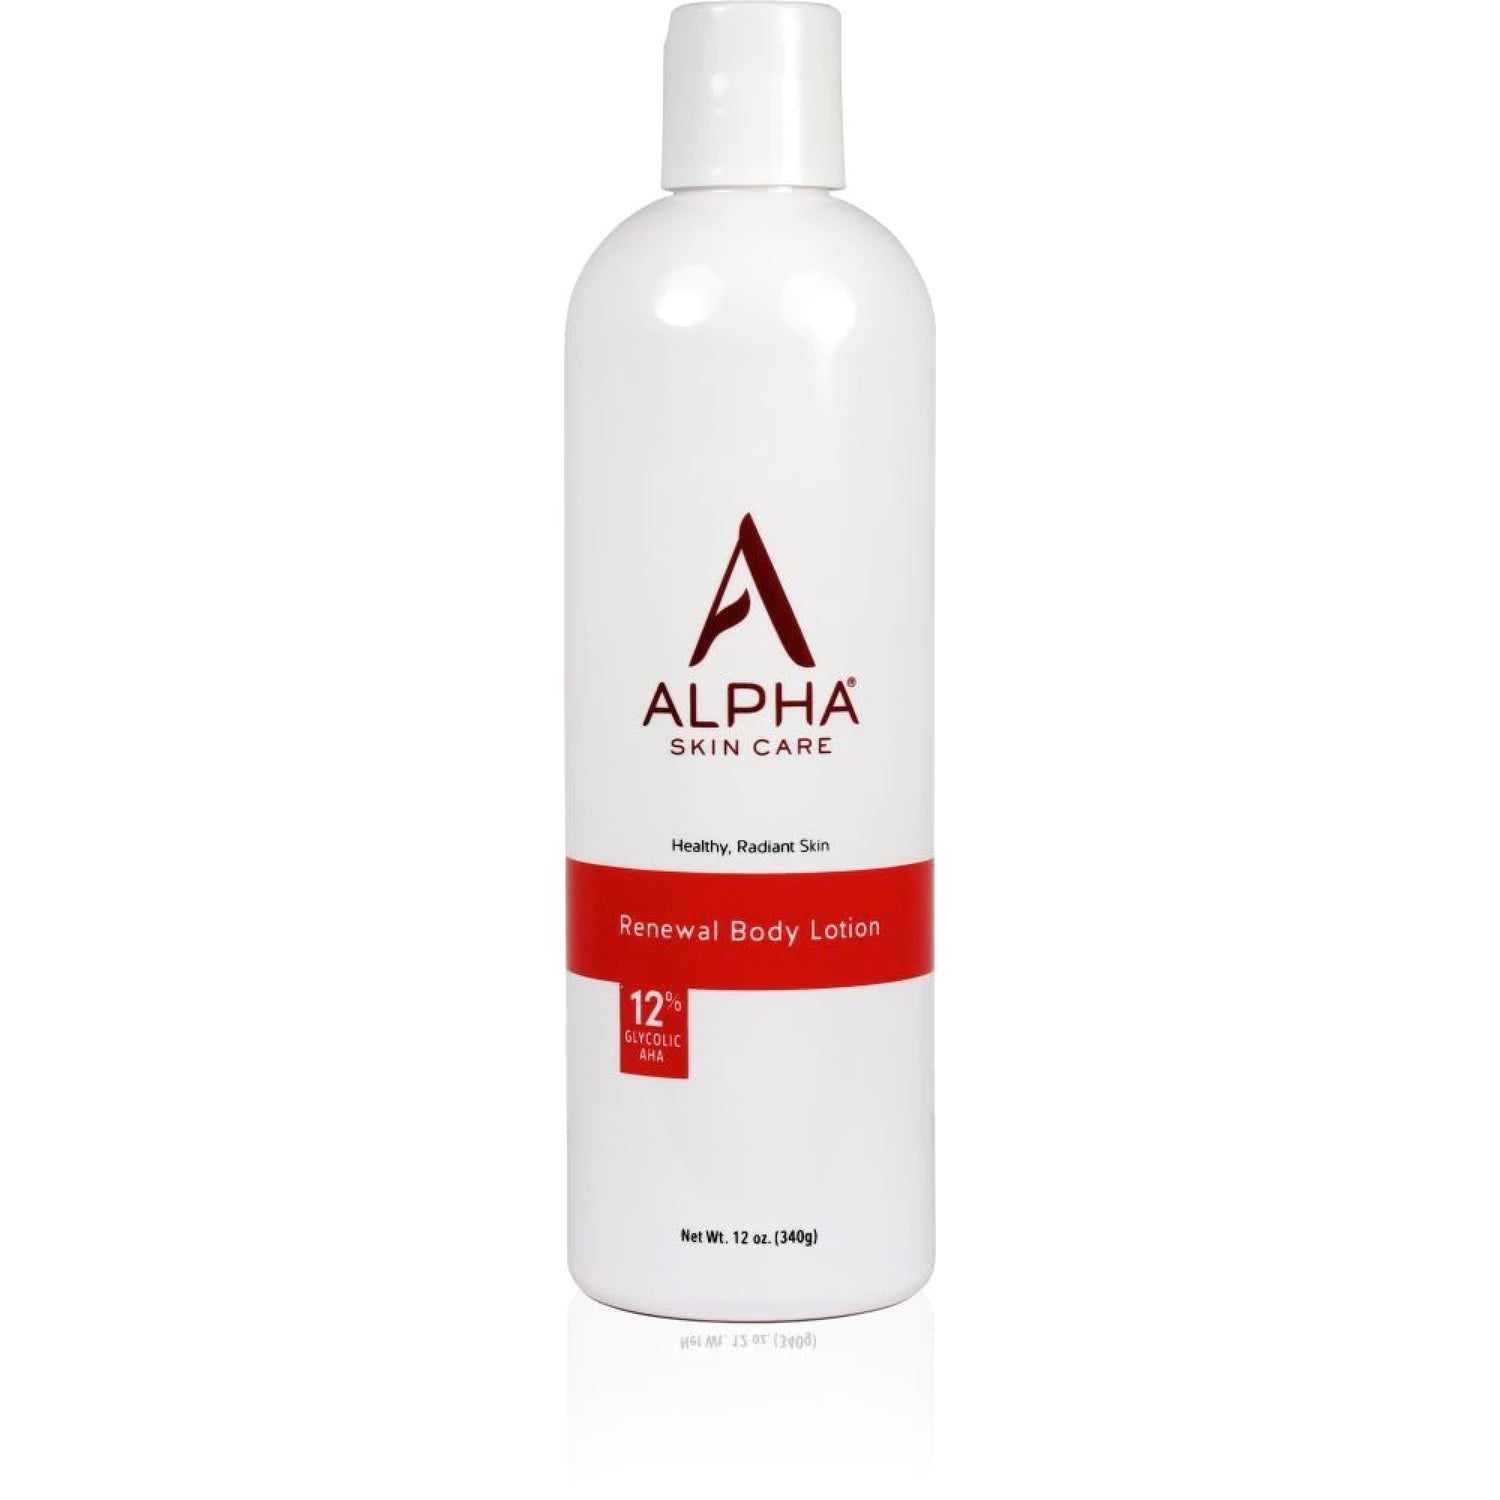 Renewal Body Lotion with 12% AHA